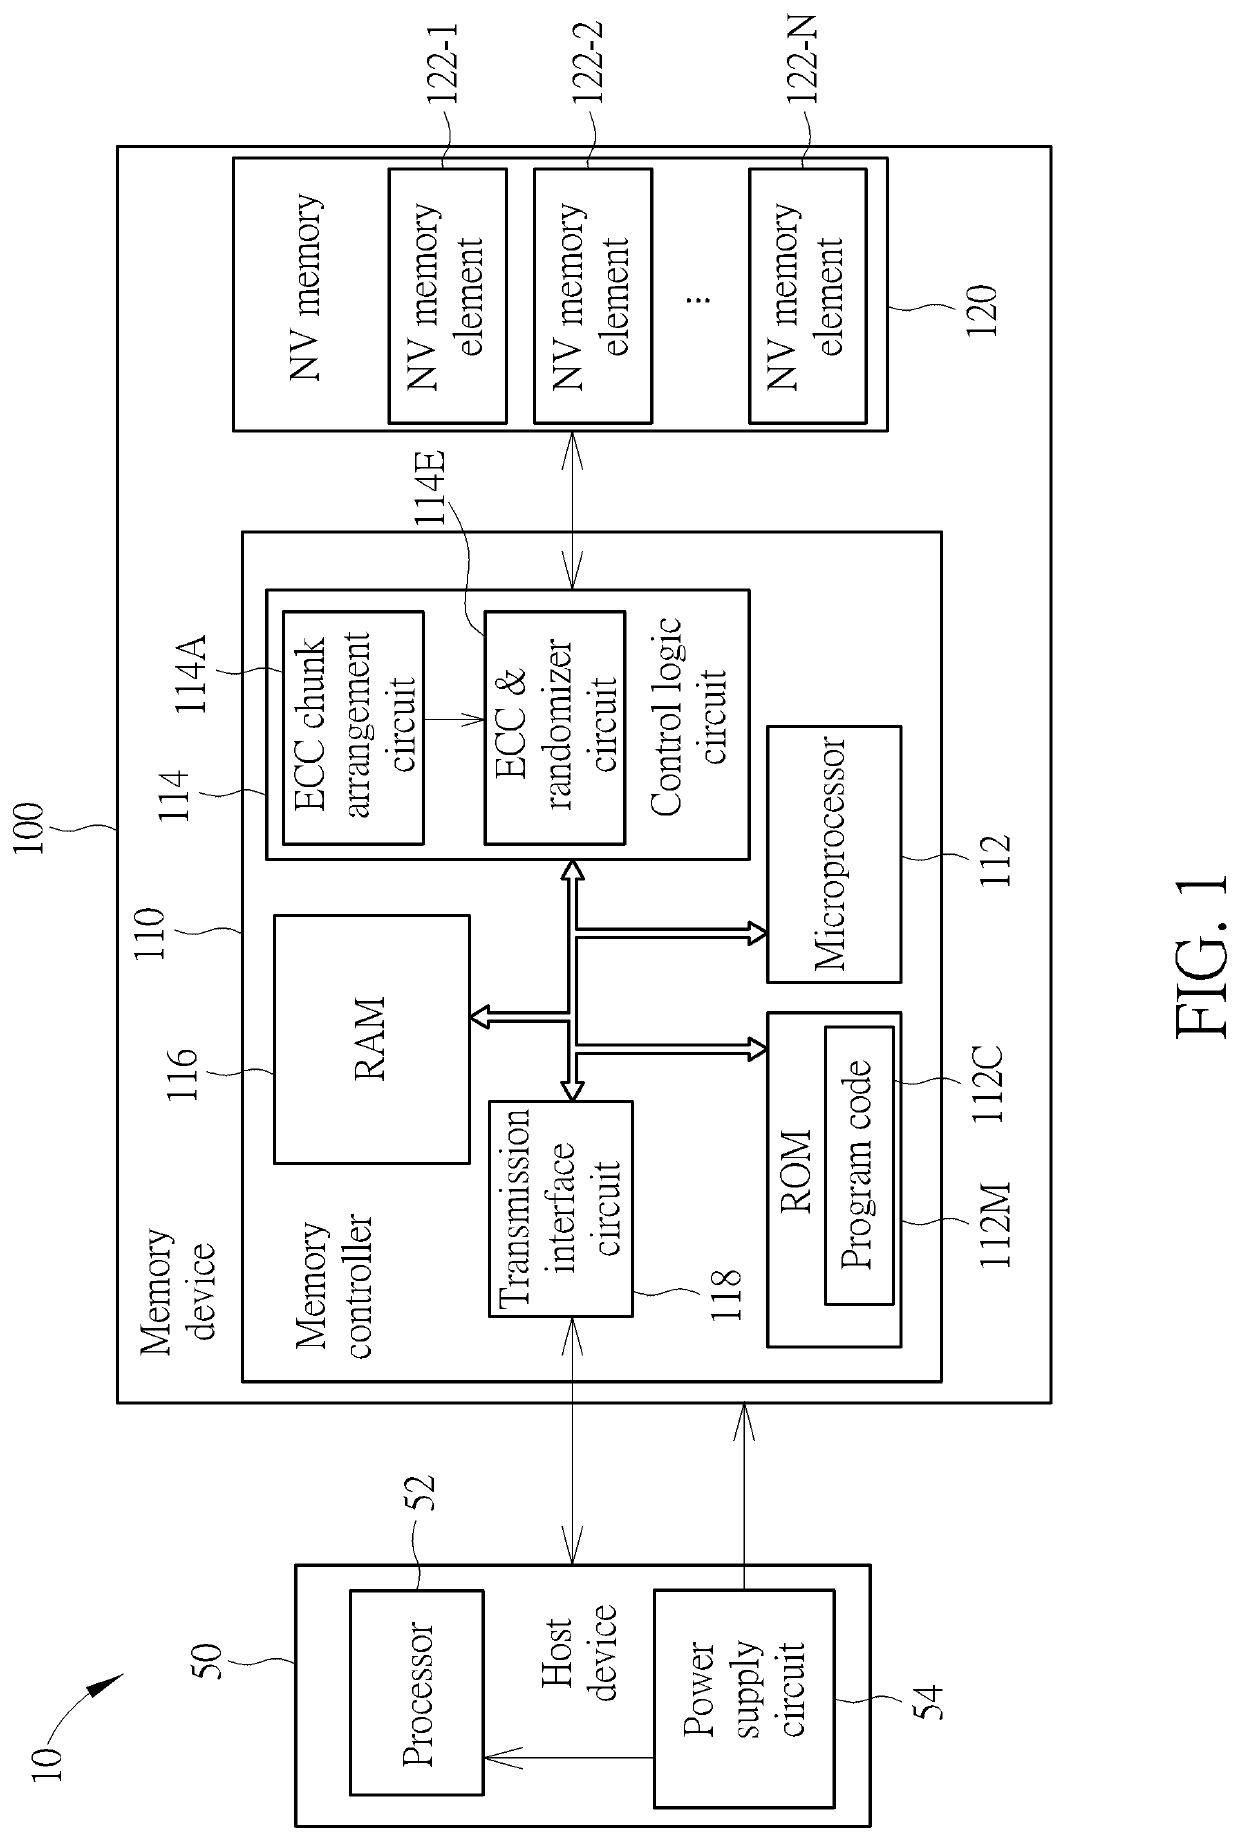 Method for performing access management of memory device with aid of information arrangement, associated memory device and controller thereof, associated electronic device